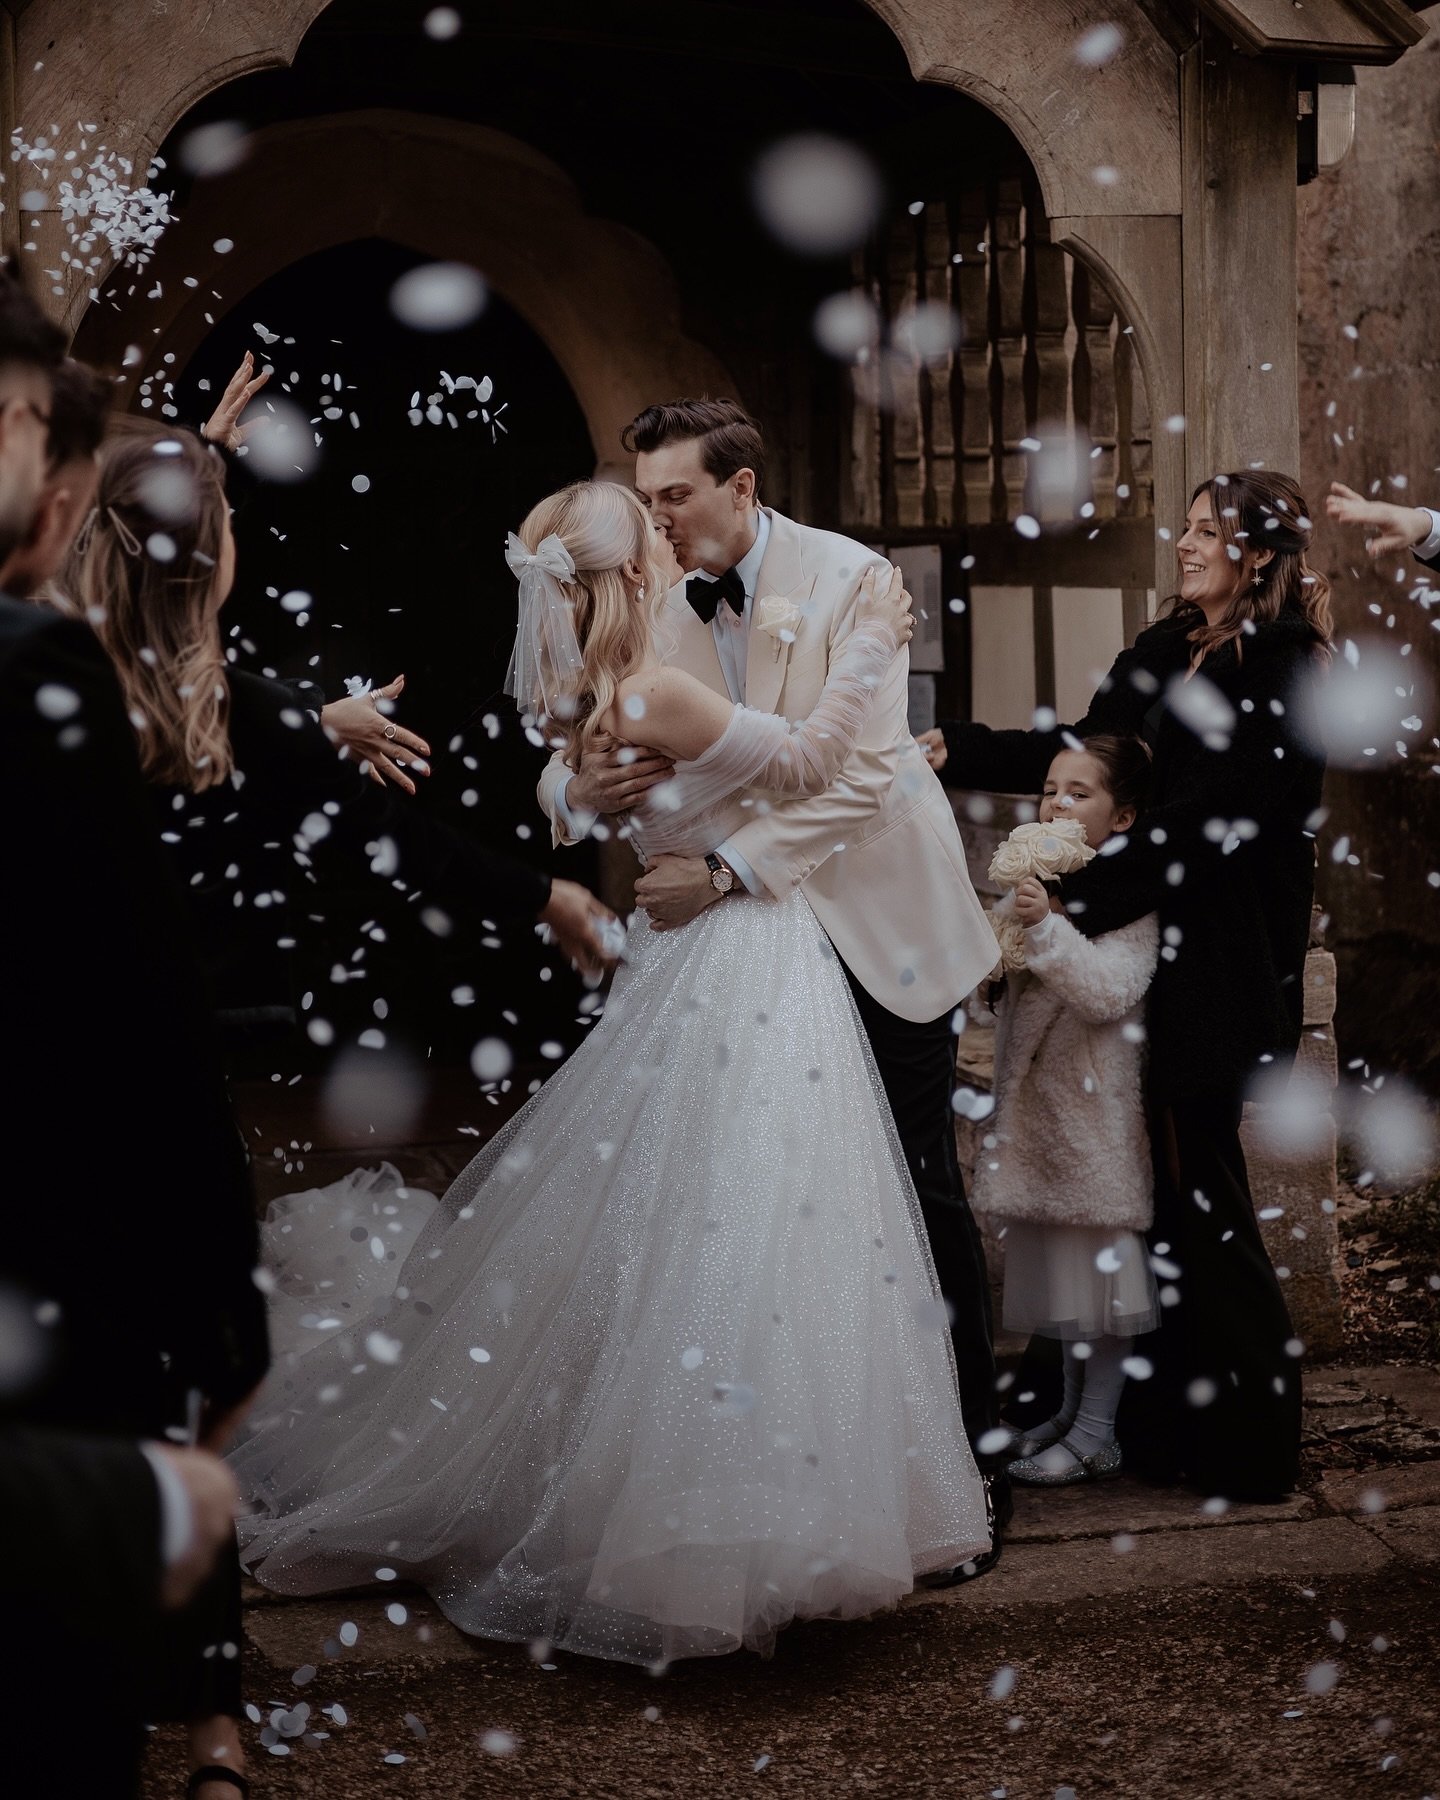 Ever wondering which confetti to get? 

If your venue allows it... always biodegradable paper in my opinion!

It floats in air for much longer and shows up stronger on images. 

I mean, this photo alone is all the proof you need really 

Photography 